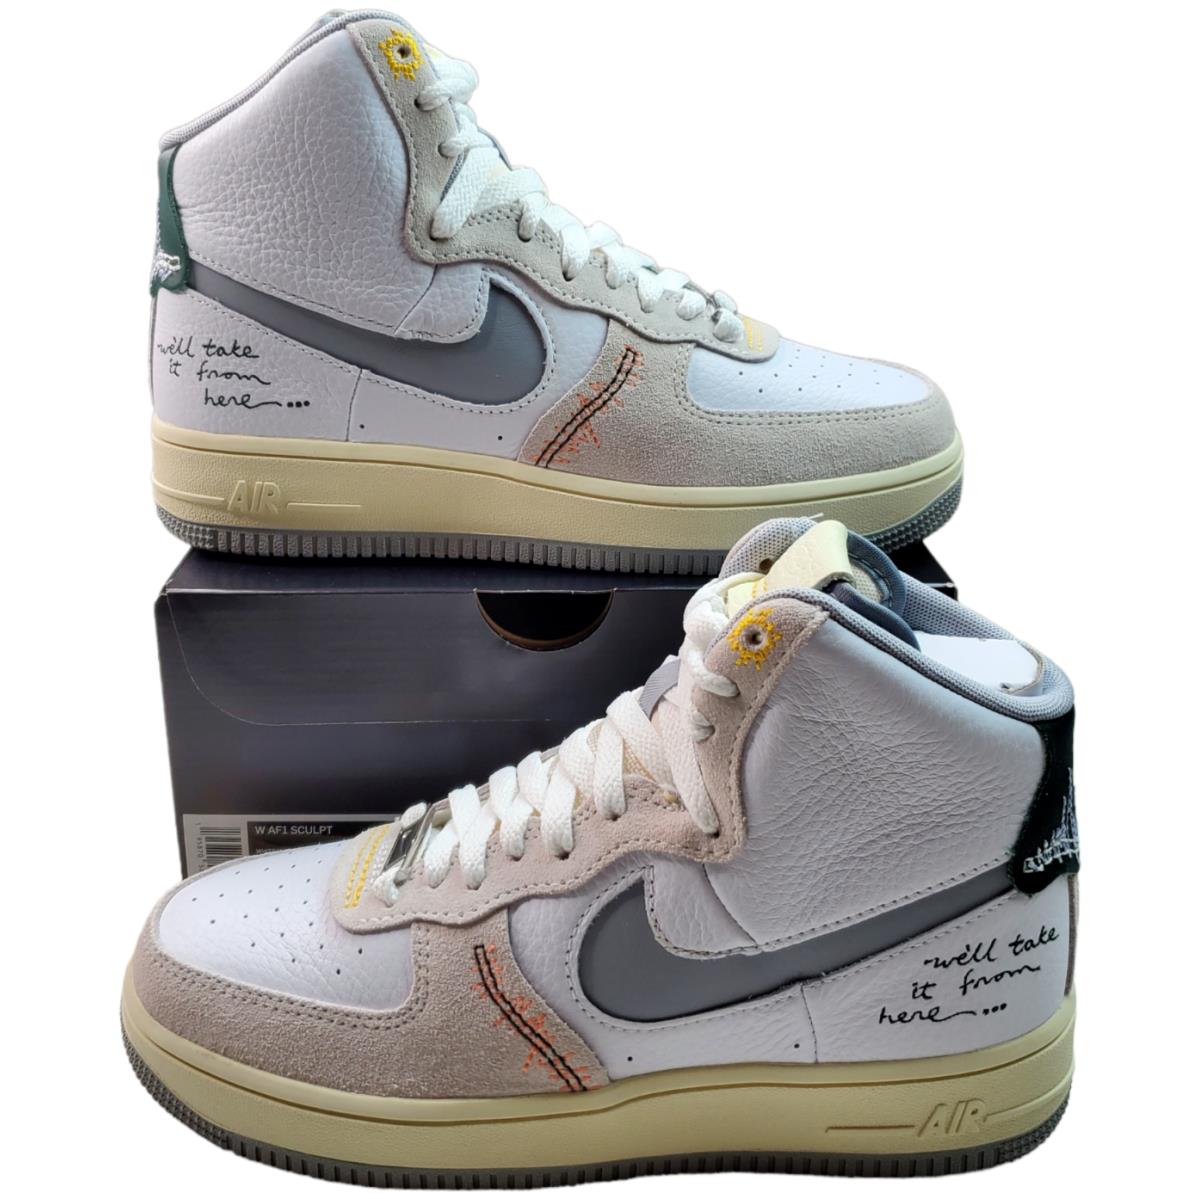 Nike Air Force One Shoes High Sculpt Wolf Grey Womens Size 6.5